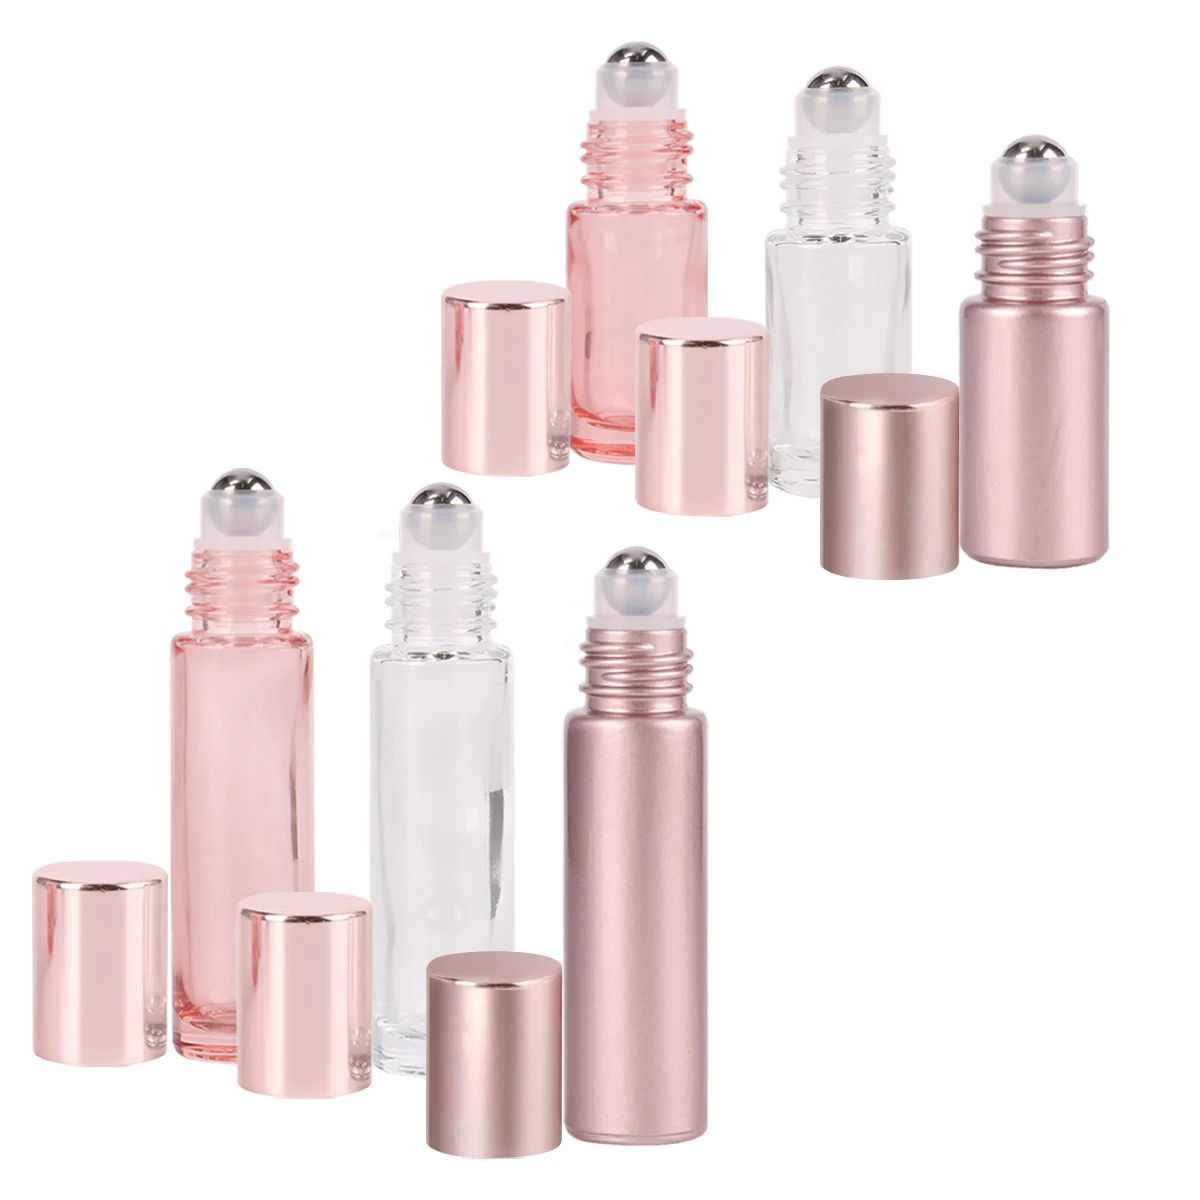 24 pieces 5ml/10ml Pink/Matte Rose/Transparent Glass Roll on Bottle with Stainless Steel Roller Ball for Perfume Essential Oil